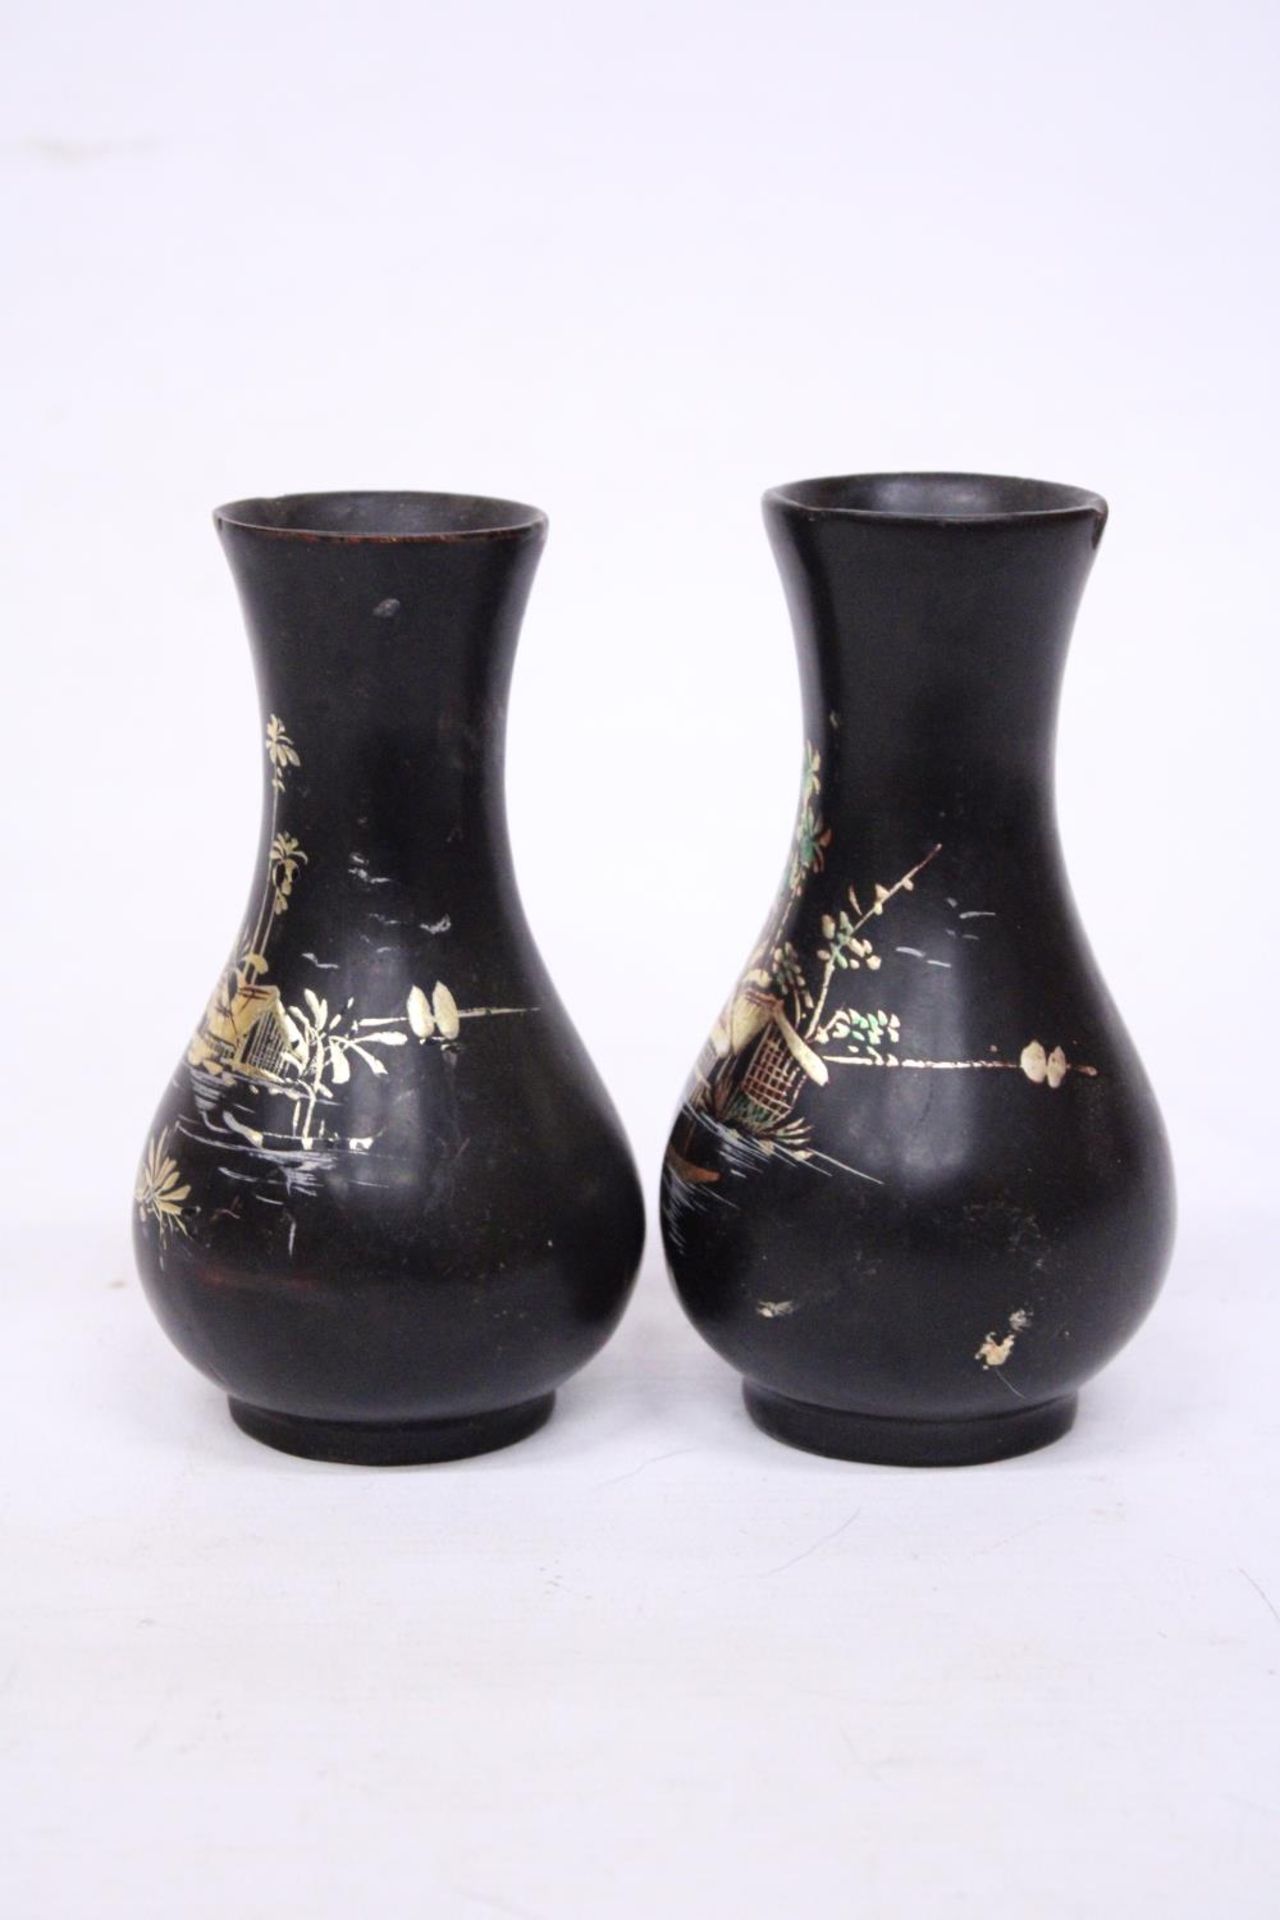 A PAIR OF FOOTED WOODEN LACQUER VASES WITH ORIENTAL SCENES - 14 CM (H) - Image 4 of 5